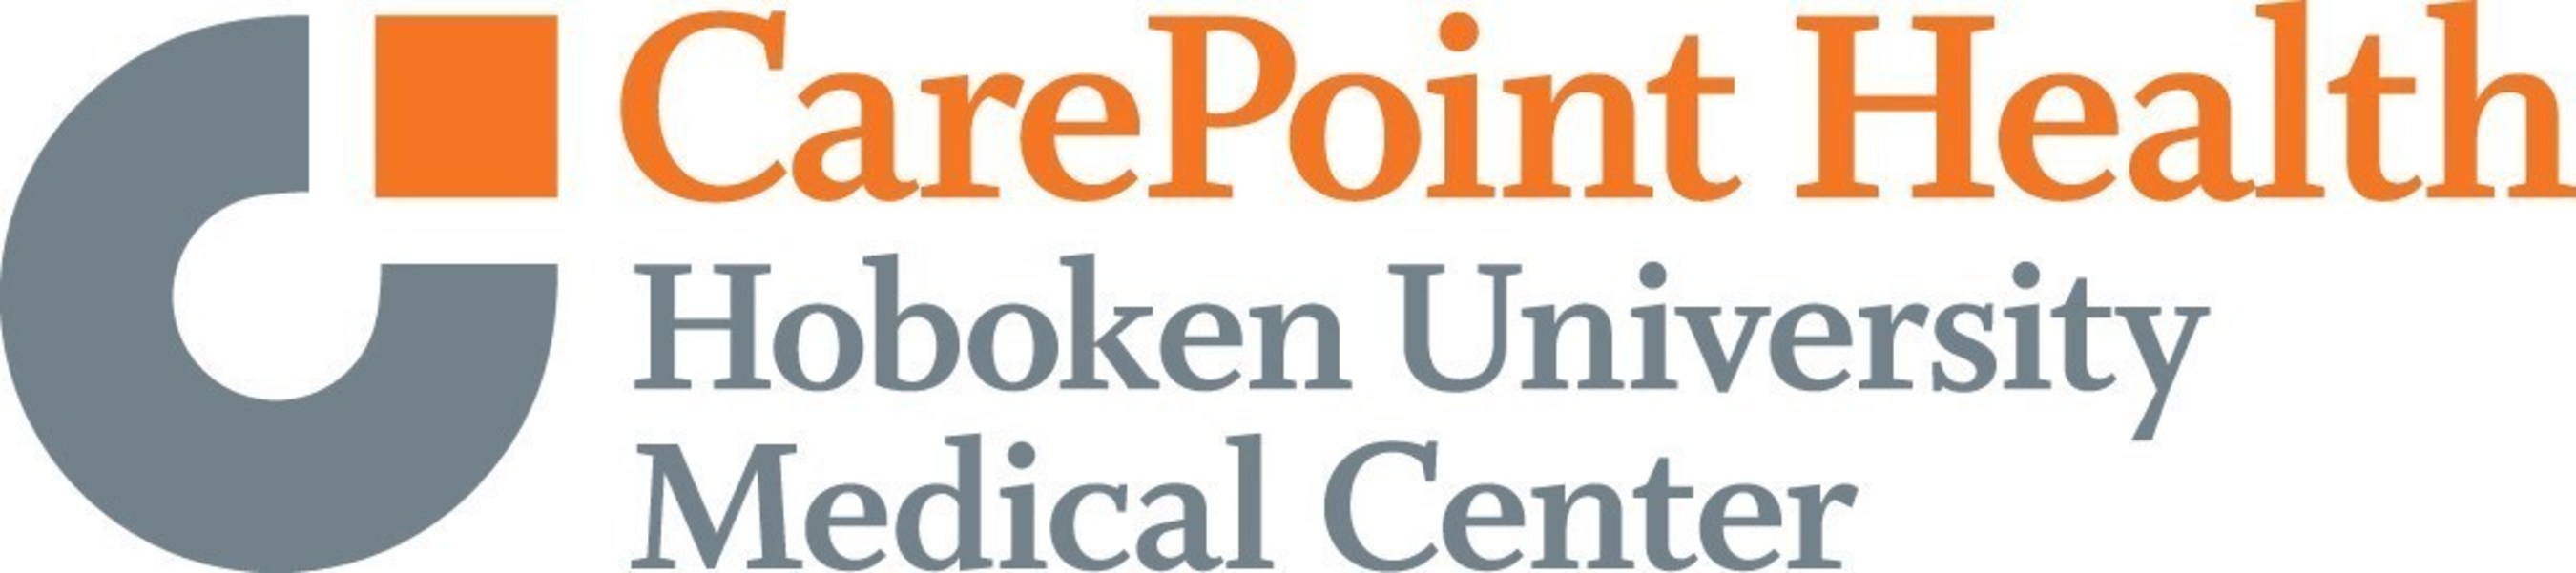 Carepoint Health - Hoboken University Medical Center Awarded American College Of Radiology Designation As Lung Cancer Screening Center (PRNewsFoto/CarePoint Health)